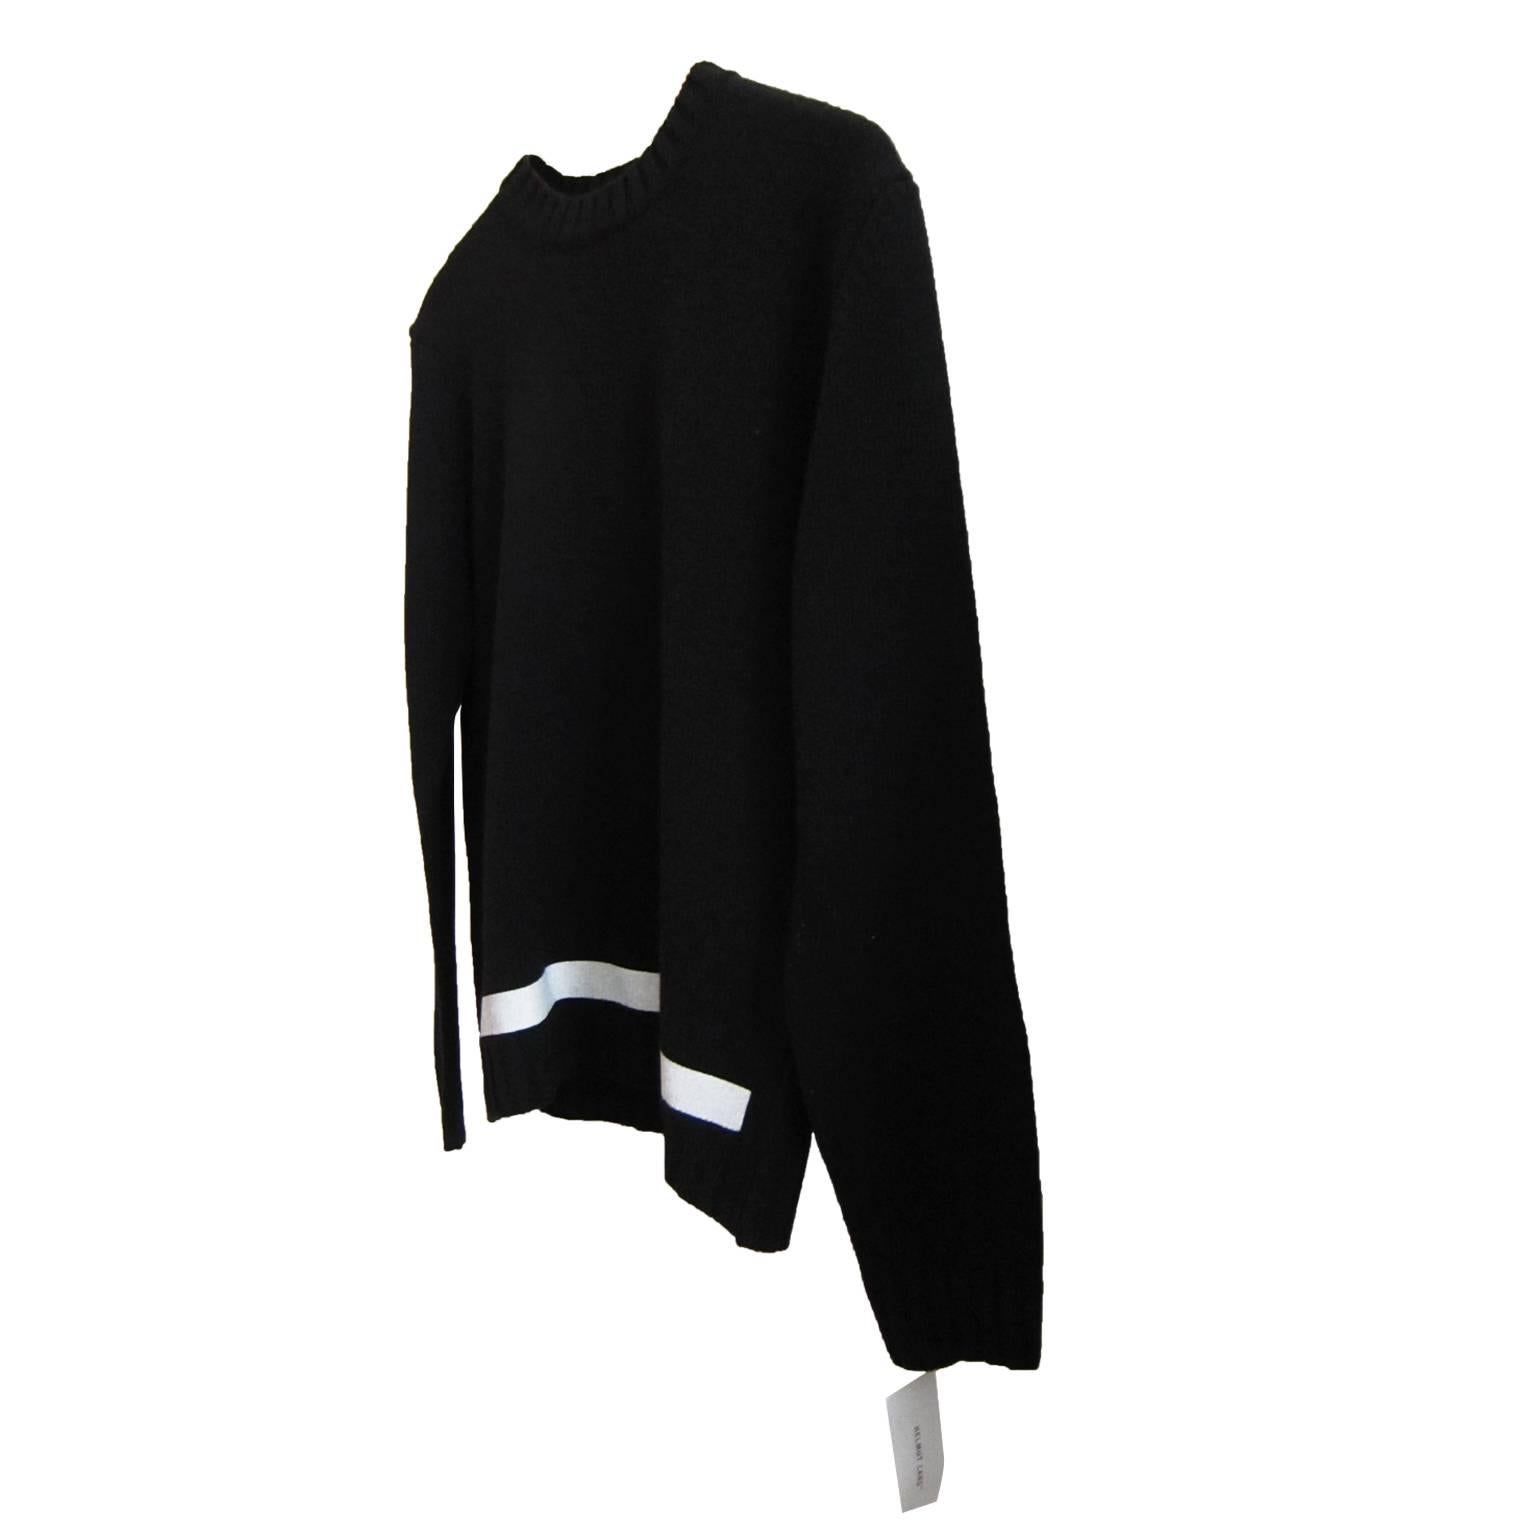 Helmut Lang black wool jumper from 1997. With white painted stripe on front.
Dead stock / New With Tag. An amazing archival piece in unworn condition.
Original size : M
 